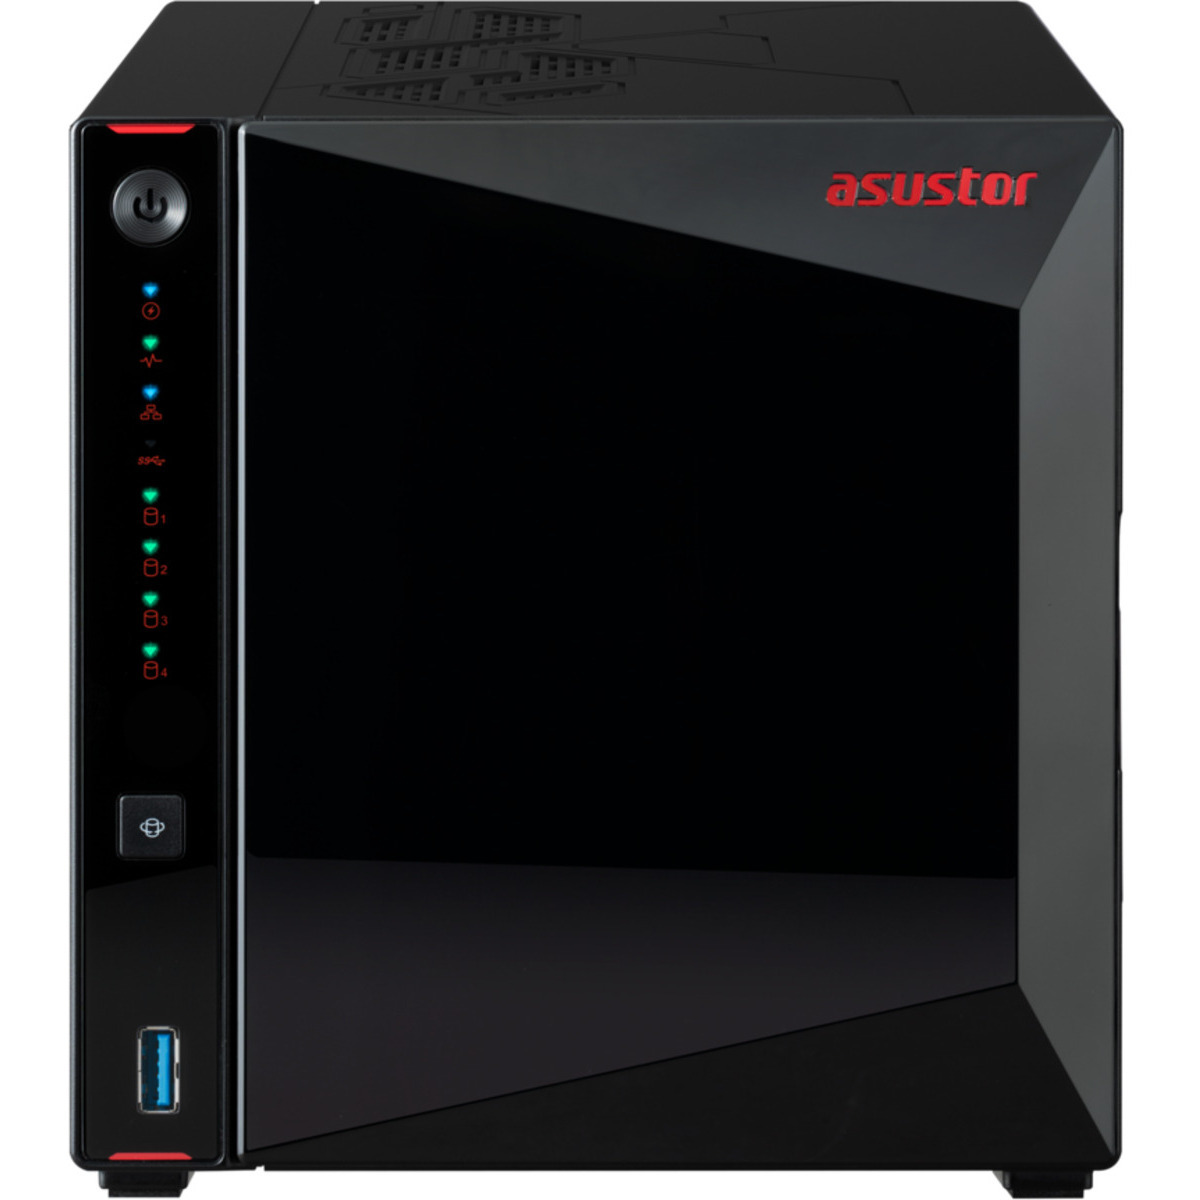 buy ASUSTOR Nimbustor 4 Gen2 AS5404T 88tb Desktop NAS - Network Attached Storage Device 4x22000gb Seagate IronWolf Pro ST22000NT001 3.5 7200rpm SATA 6Gb/s HDD NAS Class Drives Installed - Burn-In Tested - ON SALE - FREE RAM UPGRADE - nas headquarters buy network attached storage server device das new raid-5 free shipping simply usa Nimbustor 4 Gen2 AS5404T